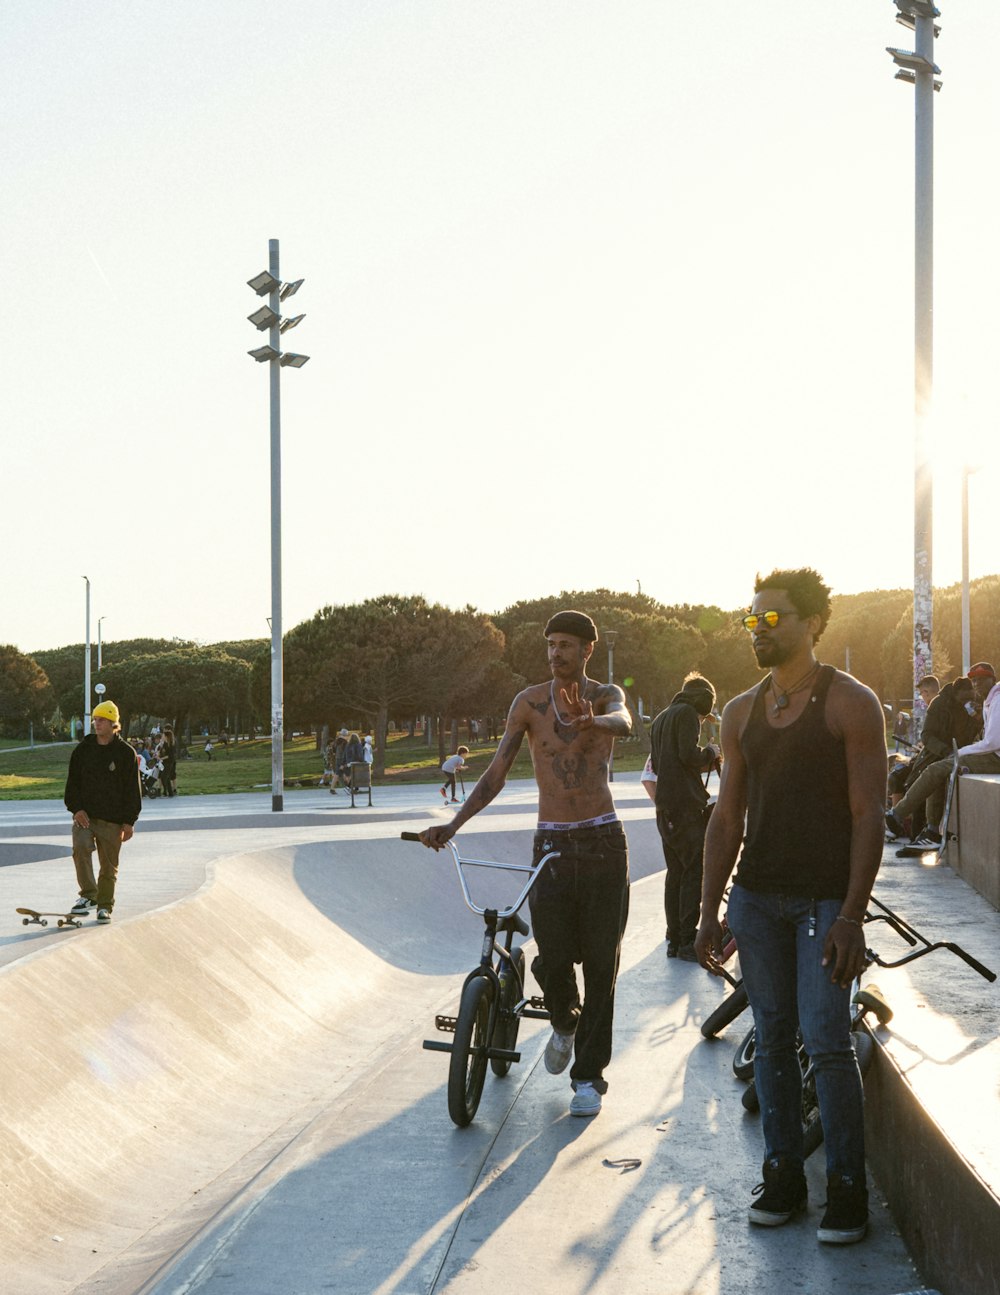 a group of people on a skateboard at a skate park